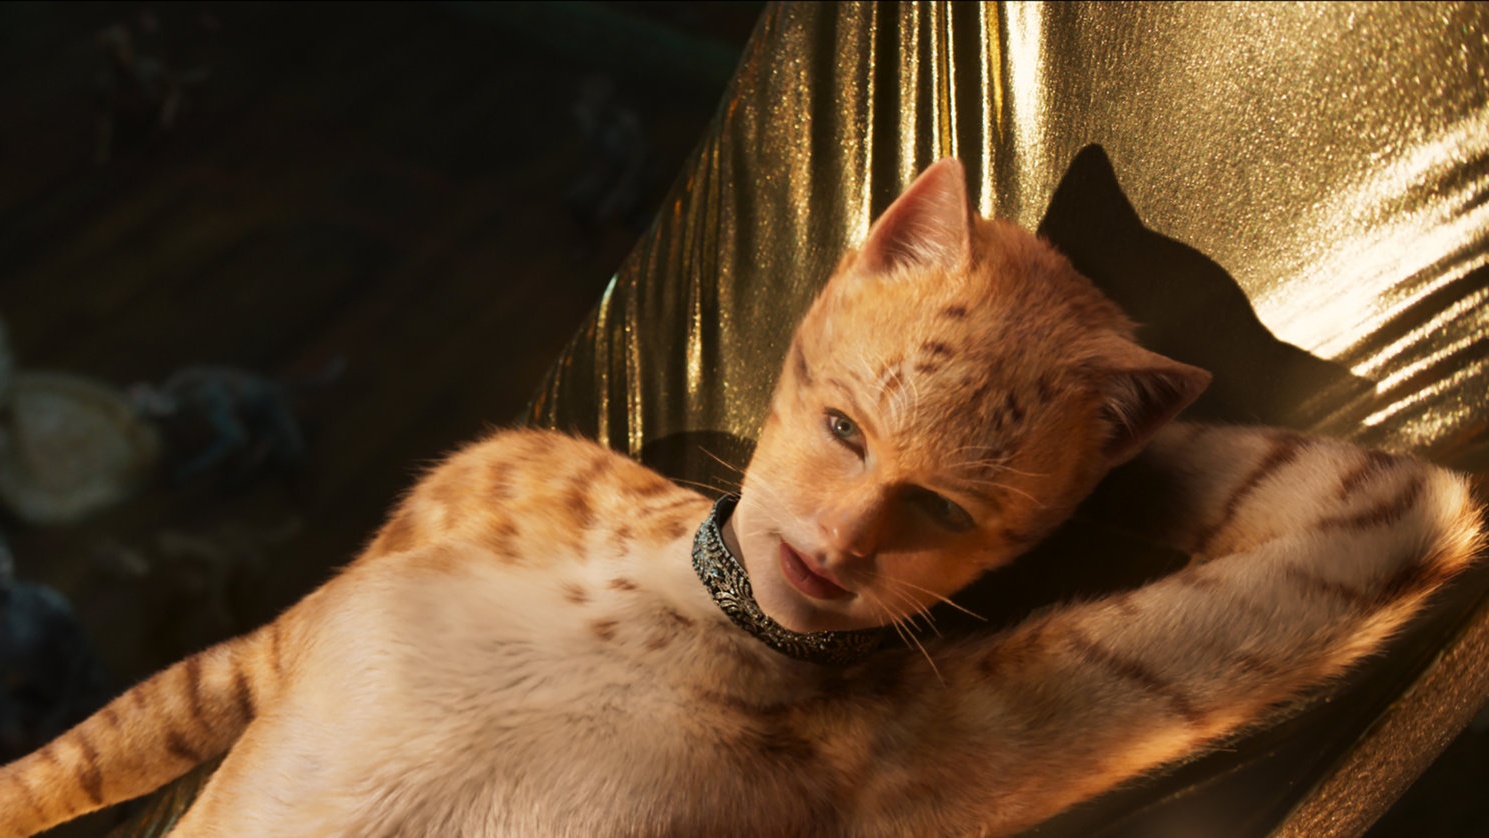 A scene from the Cats movie 